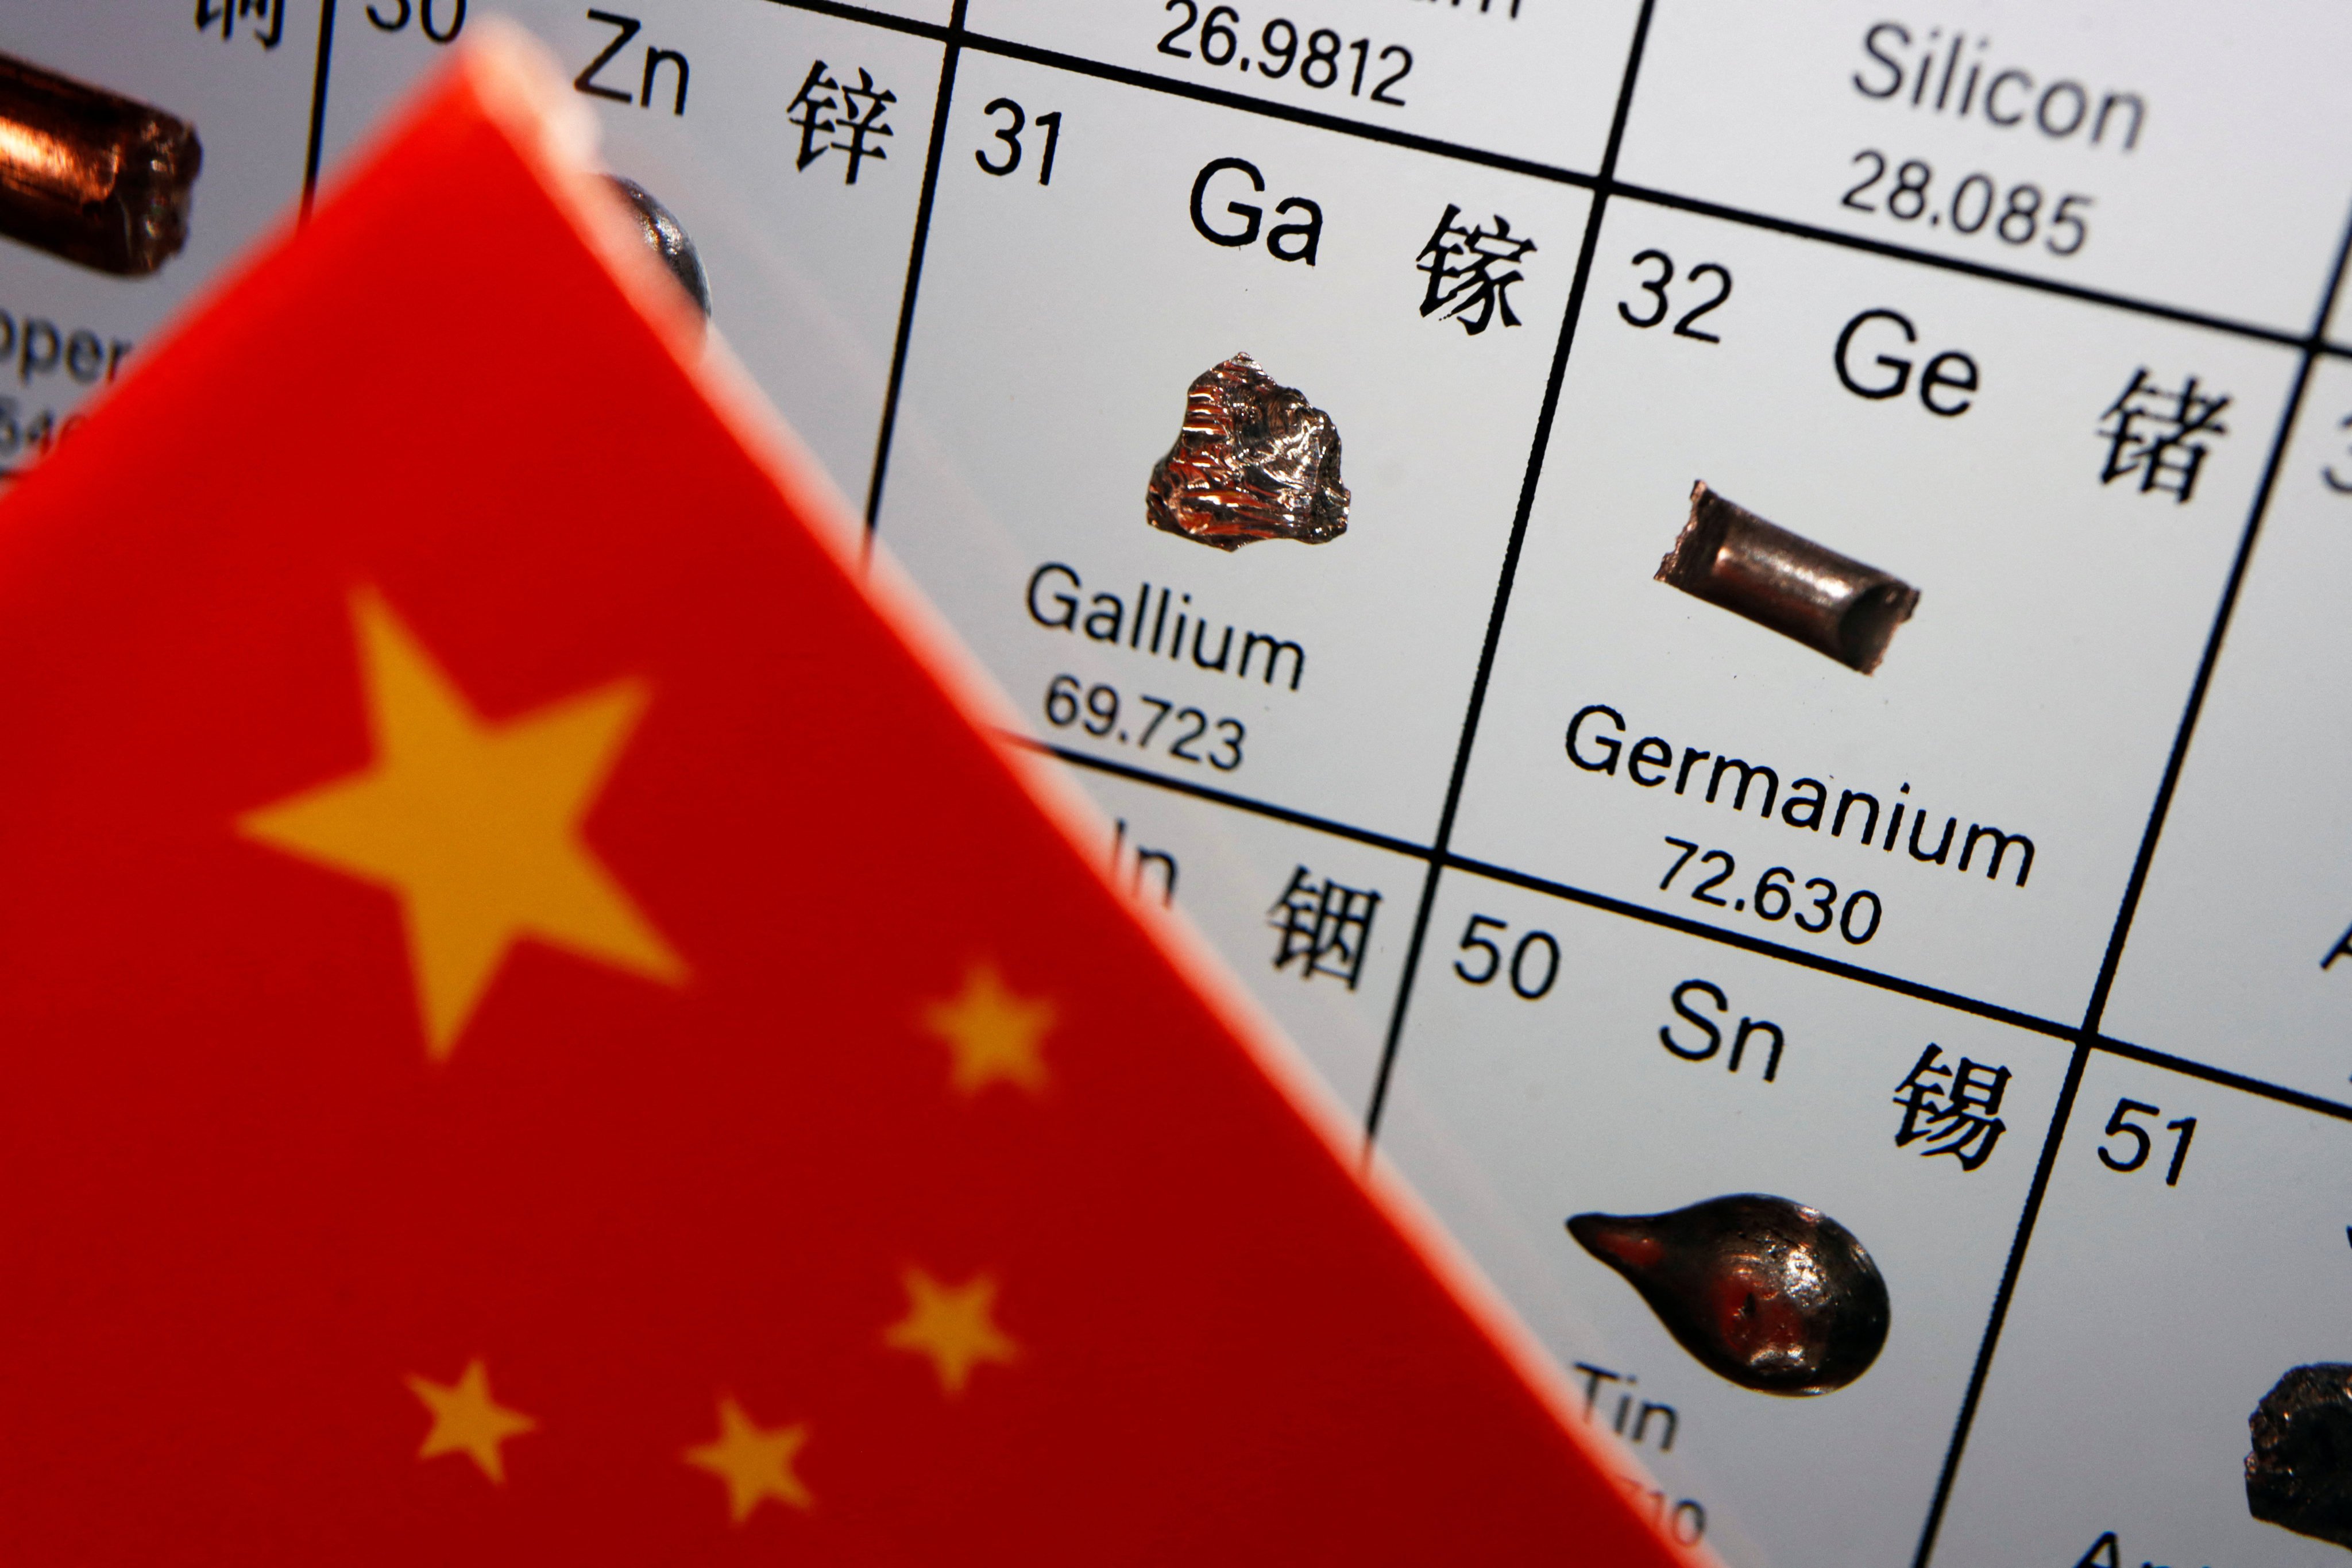 China’s export restrictions on  the elements of gallium and germanium has drawn a sharp response from the US. Photo: Reuters